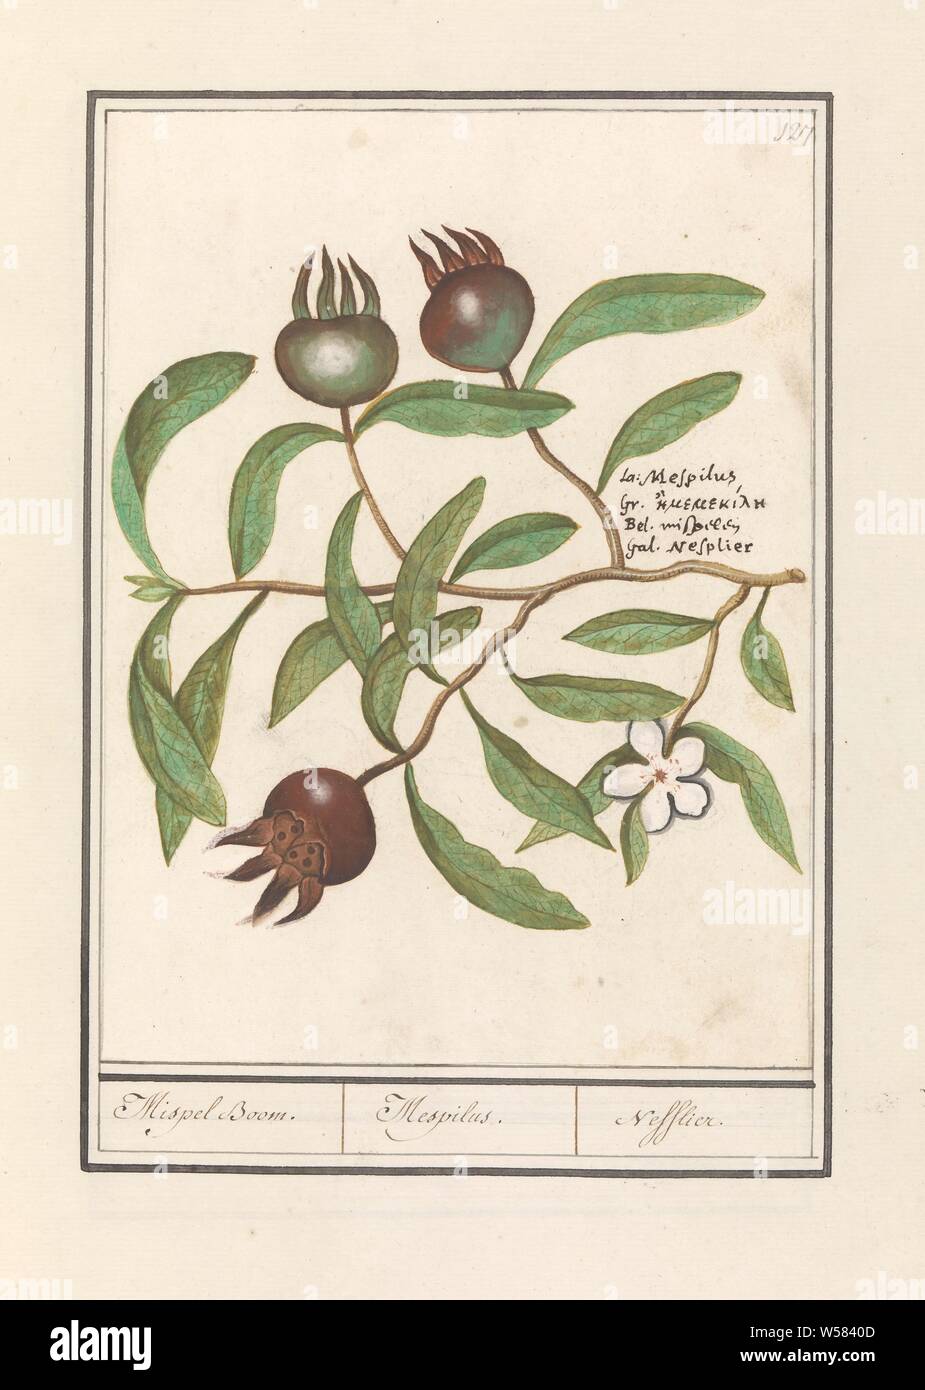 Mispel (Mespilus germanica) Mispel Boom. / Mespilus. / Nefflier (title on object), Medlar, branch with leaves, flower and fruits. Numbered top right: 127. Right the name in four languages. Part of the second album with drawings of flowers and plants. Ninth of twelve albums with drawings of animals, birds and plants known around 1600, commissioned by Emperor Rudolf II. With explanations in Dutch, Latin and French., Fruits: medlar, Anselmus Boetius de Boodt, 1596 - 1610, paper, watercolor (paint), deck paint, ink, chalk, pen, h 237 mm × w 177 mm Stock Photo